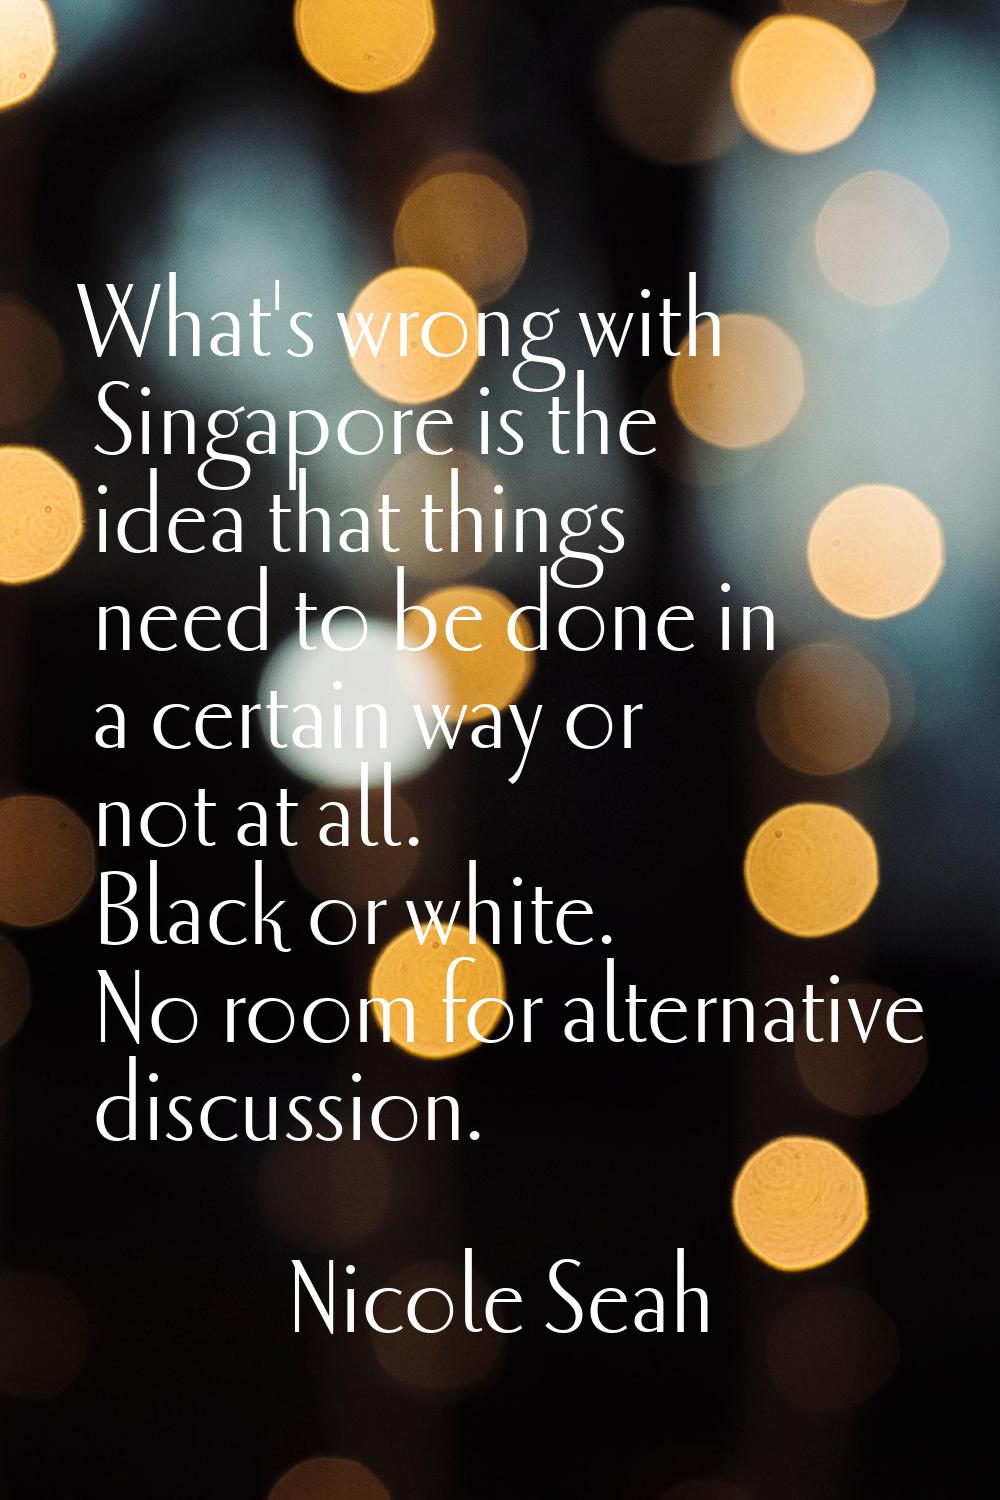 What's wrong with Singapore is the idea that things need to be done in a certain way or not at all.